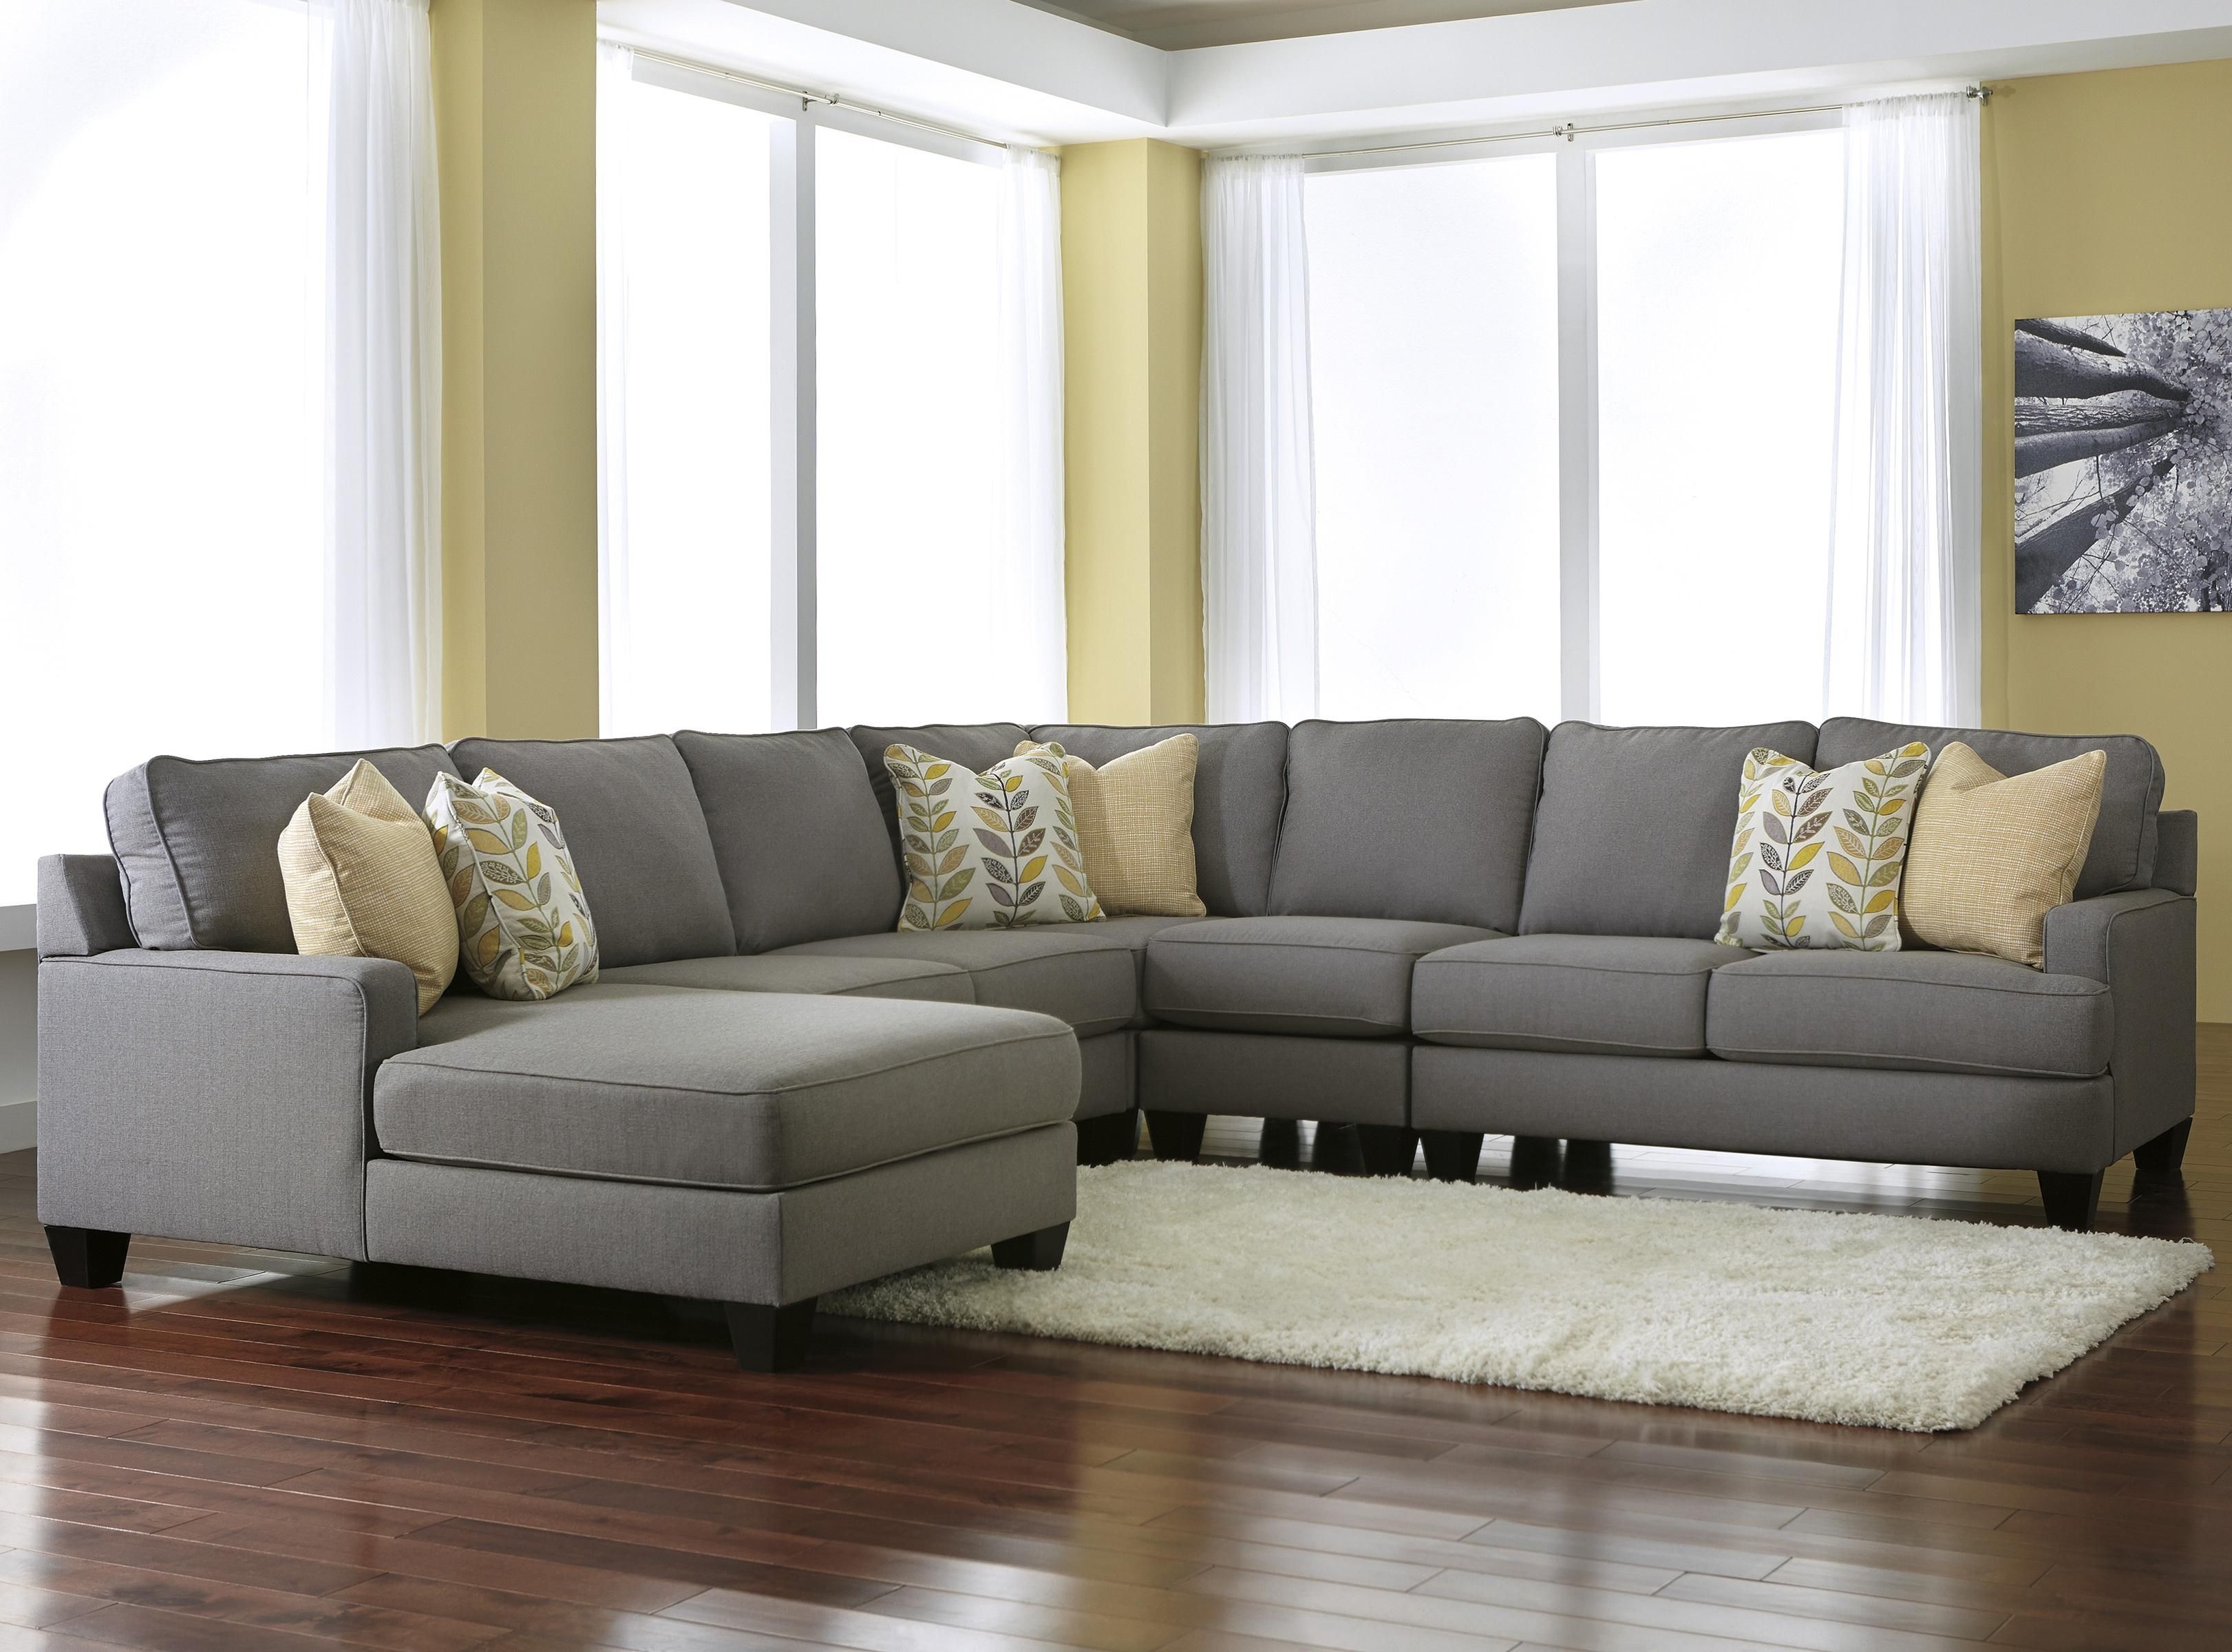 Signature Designashley Chamberly – Alloy Modern 5 Piece In Peterborough Ontario Sectional Sofas (View 1 of 10)